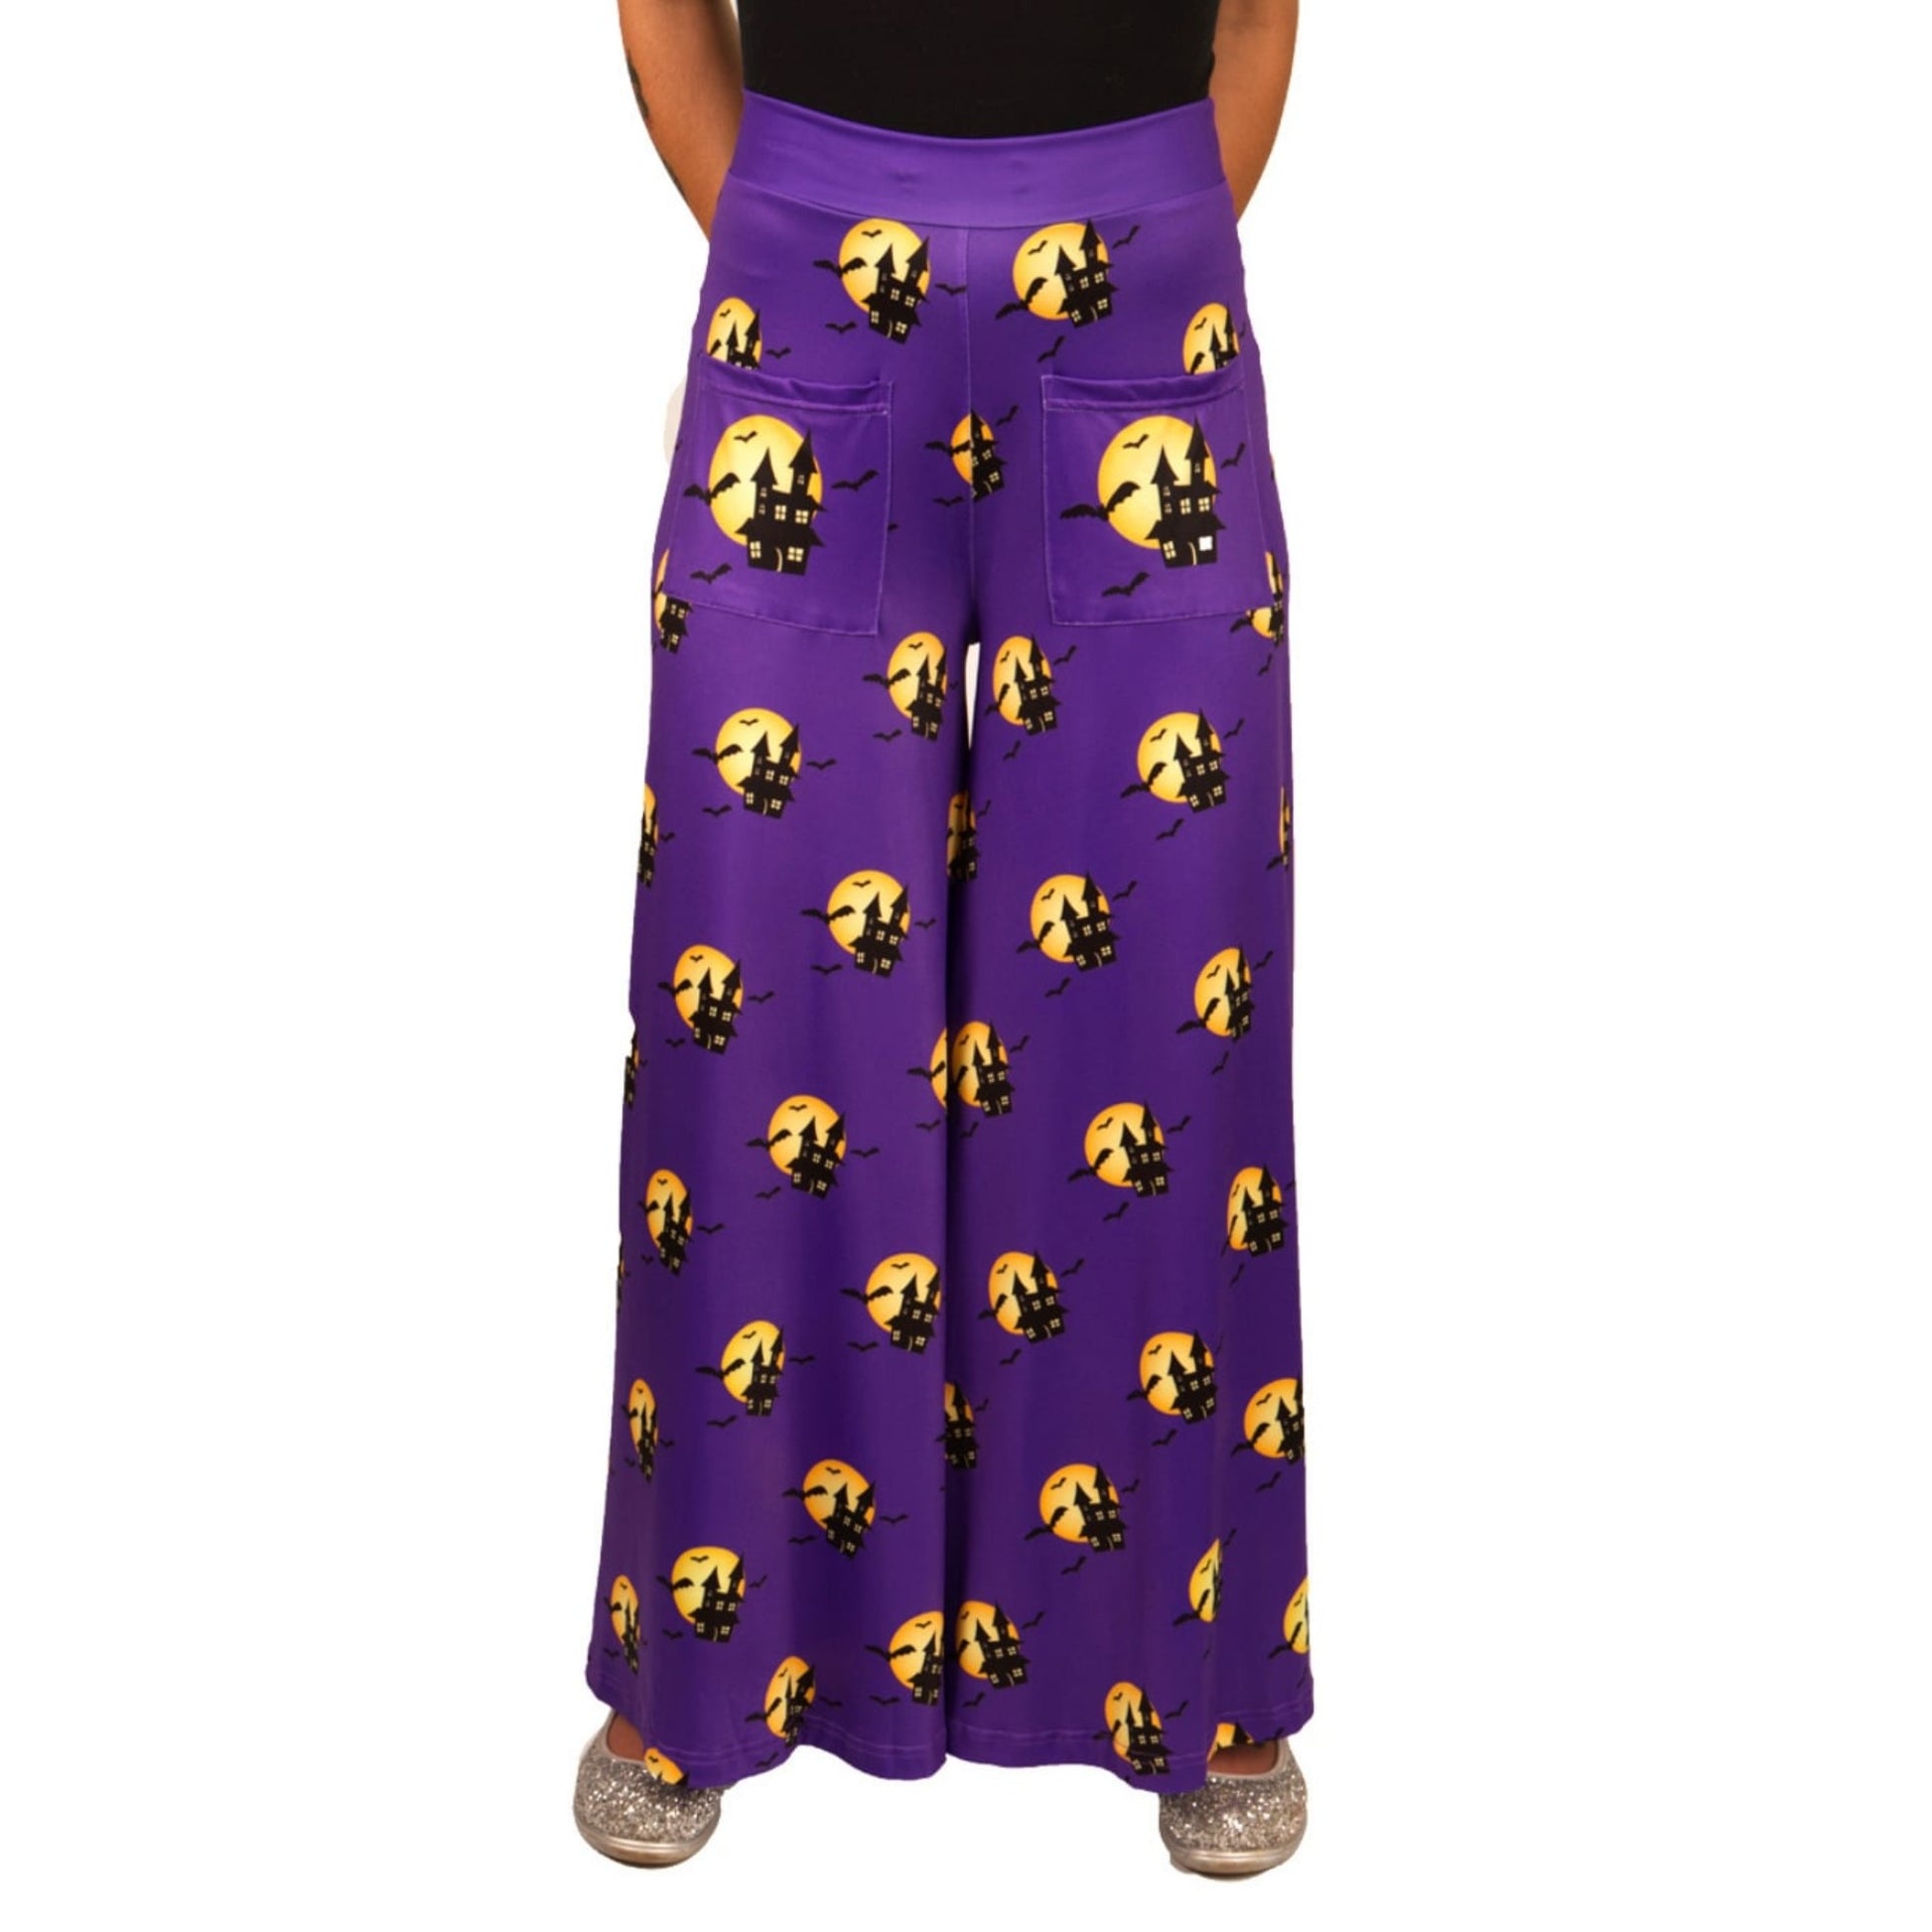 Haunted House Wide Leg Pants by RainbowsAndFairies.com.au (Addams Family - Bats - Purple - Pants With Pockets - Vintage Inspired - Flares - Halloween) - SKU: CL_WIDEL_HAUNT_ORG - Pic-01